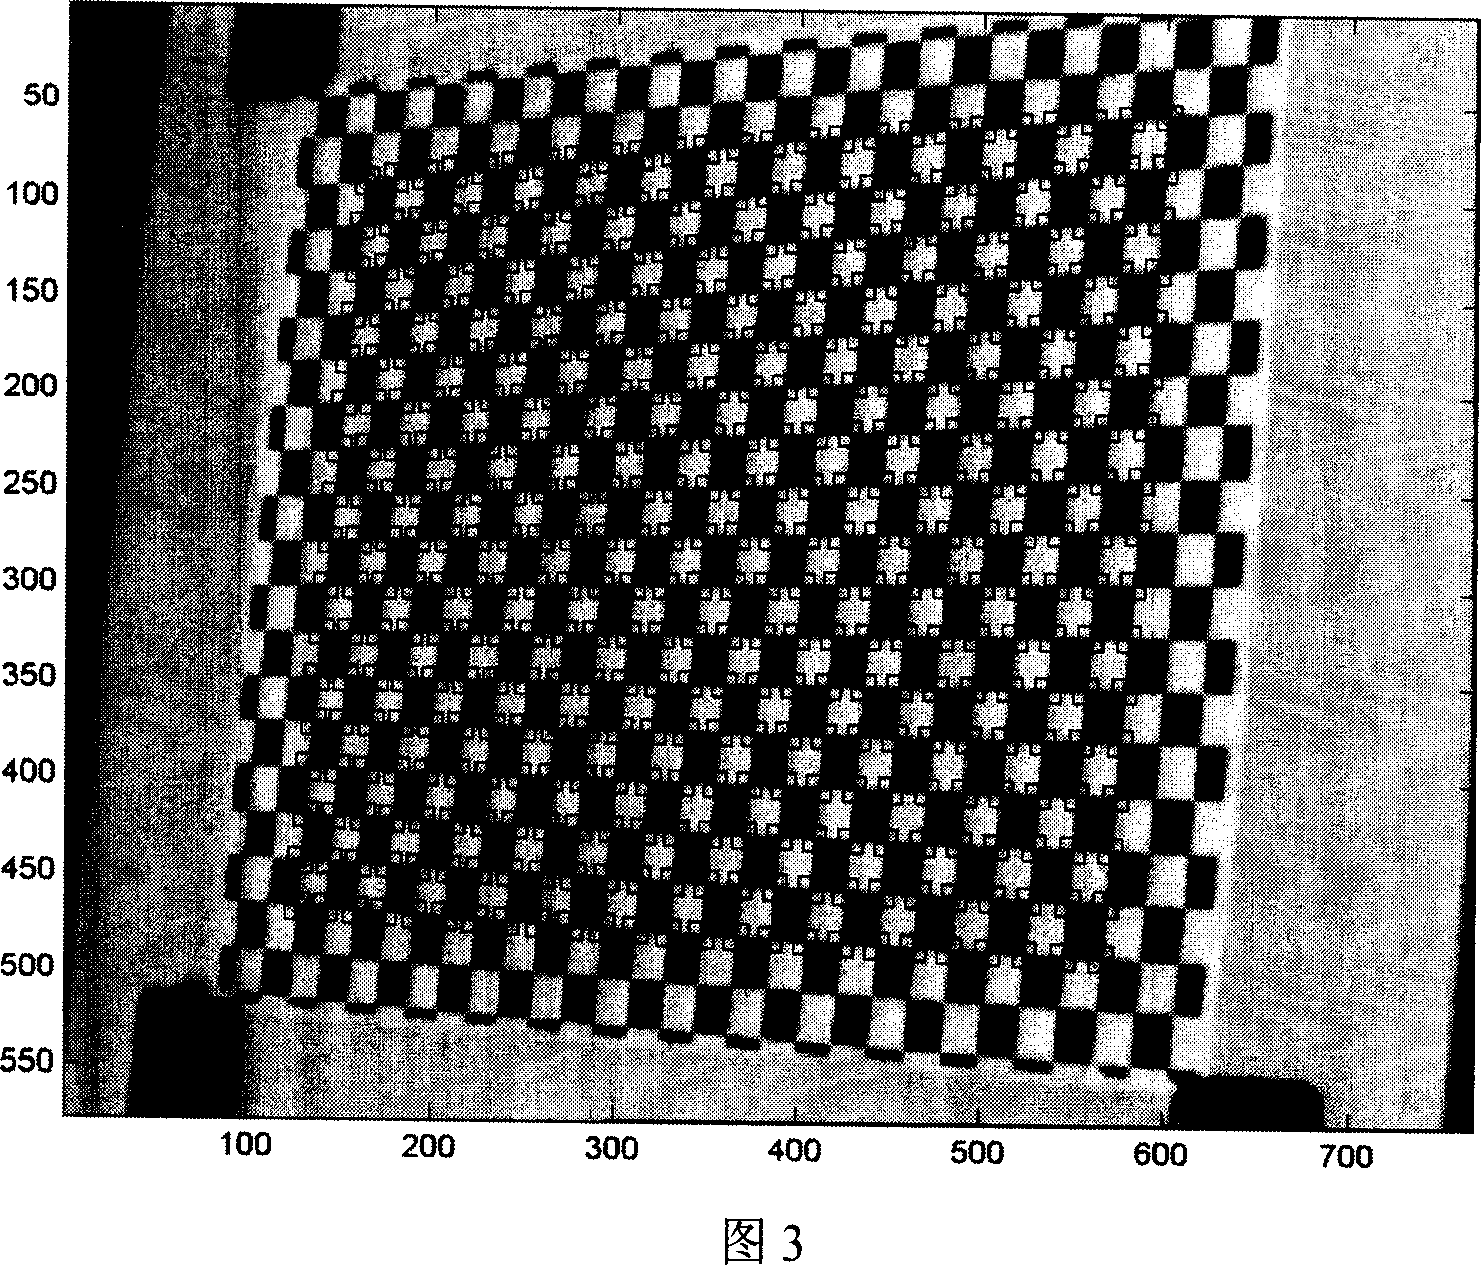 Scene depth restoring and three dimension re-setting method for stereo visual system